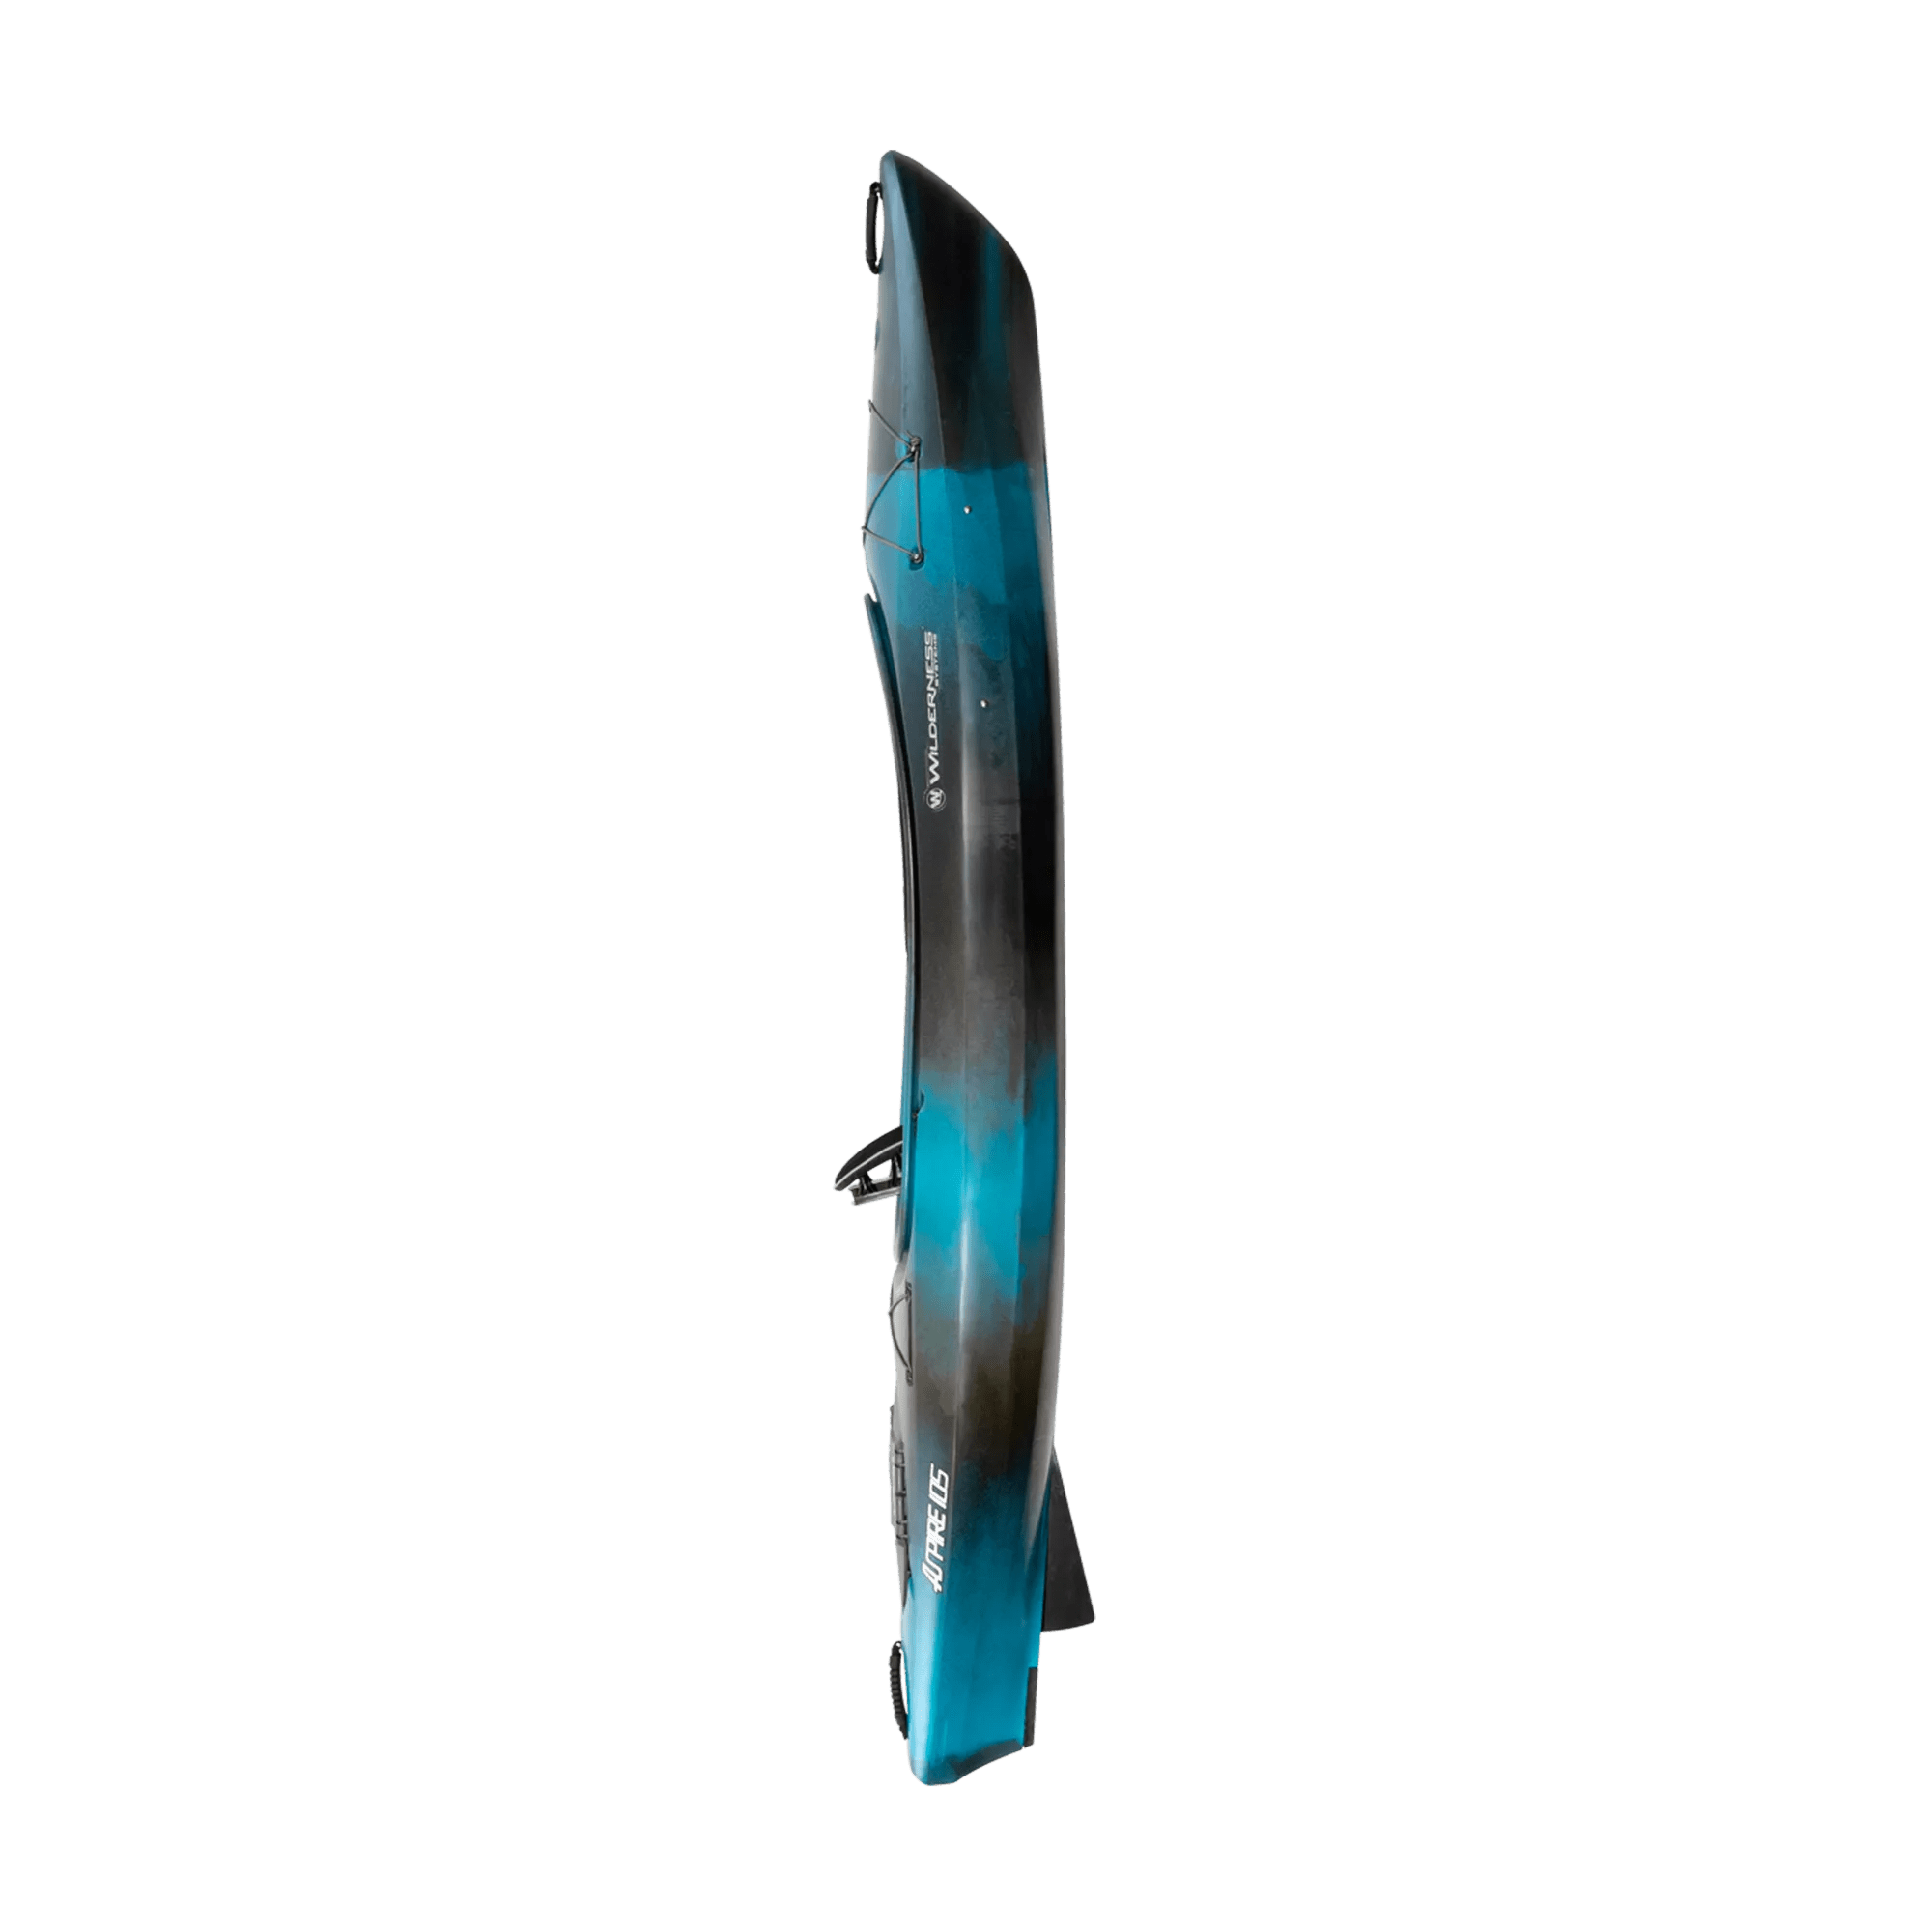 WILDERNESS SYSTEMS - Aspire 105 Recreational Kayak - Discontinued color/model - Blue - 9730325110 - SIDE